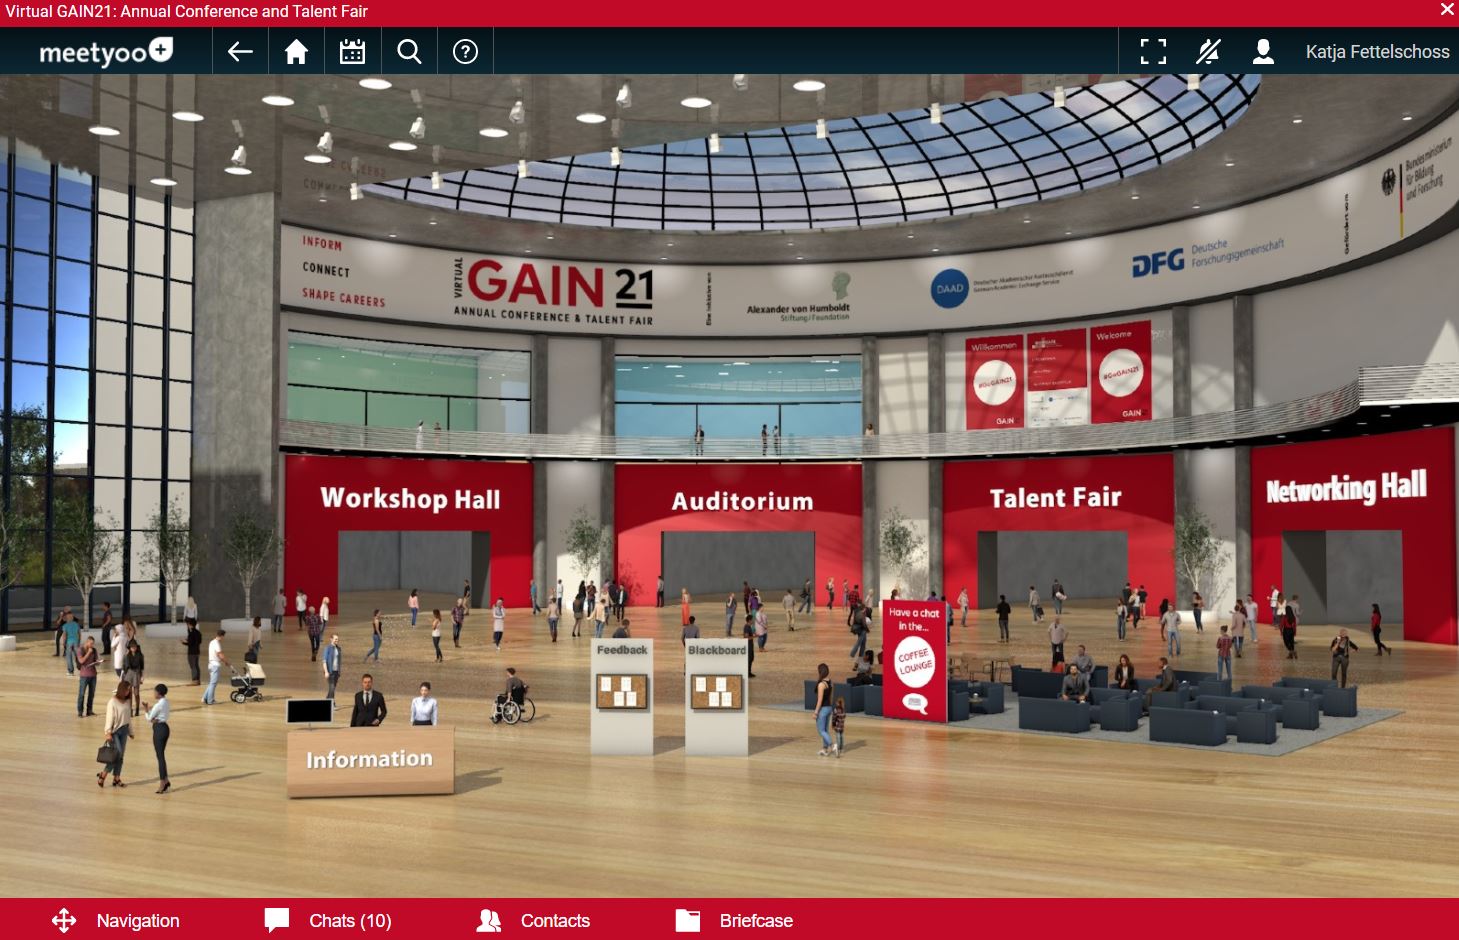 Entrance to the virtual GAIN21 conference